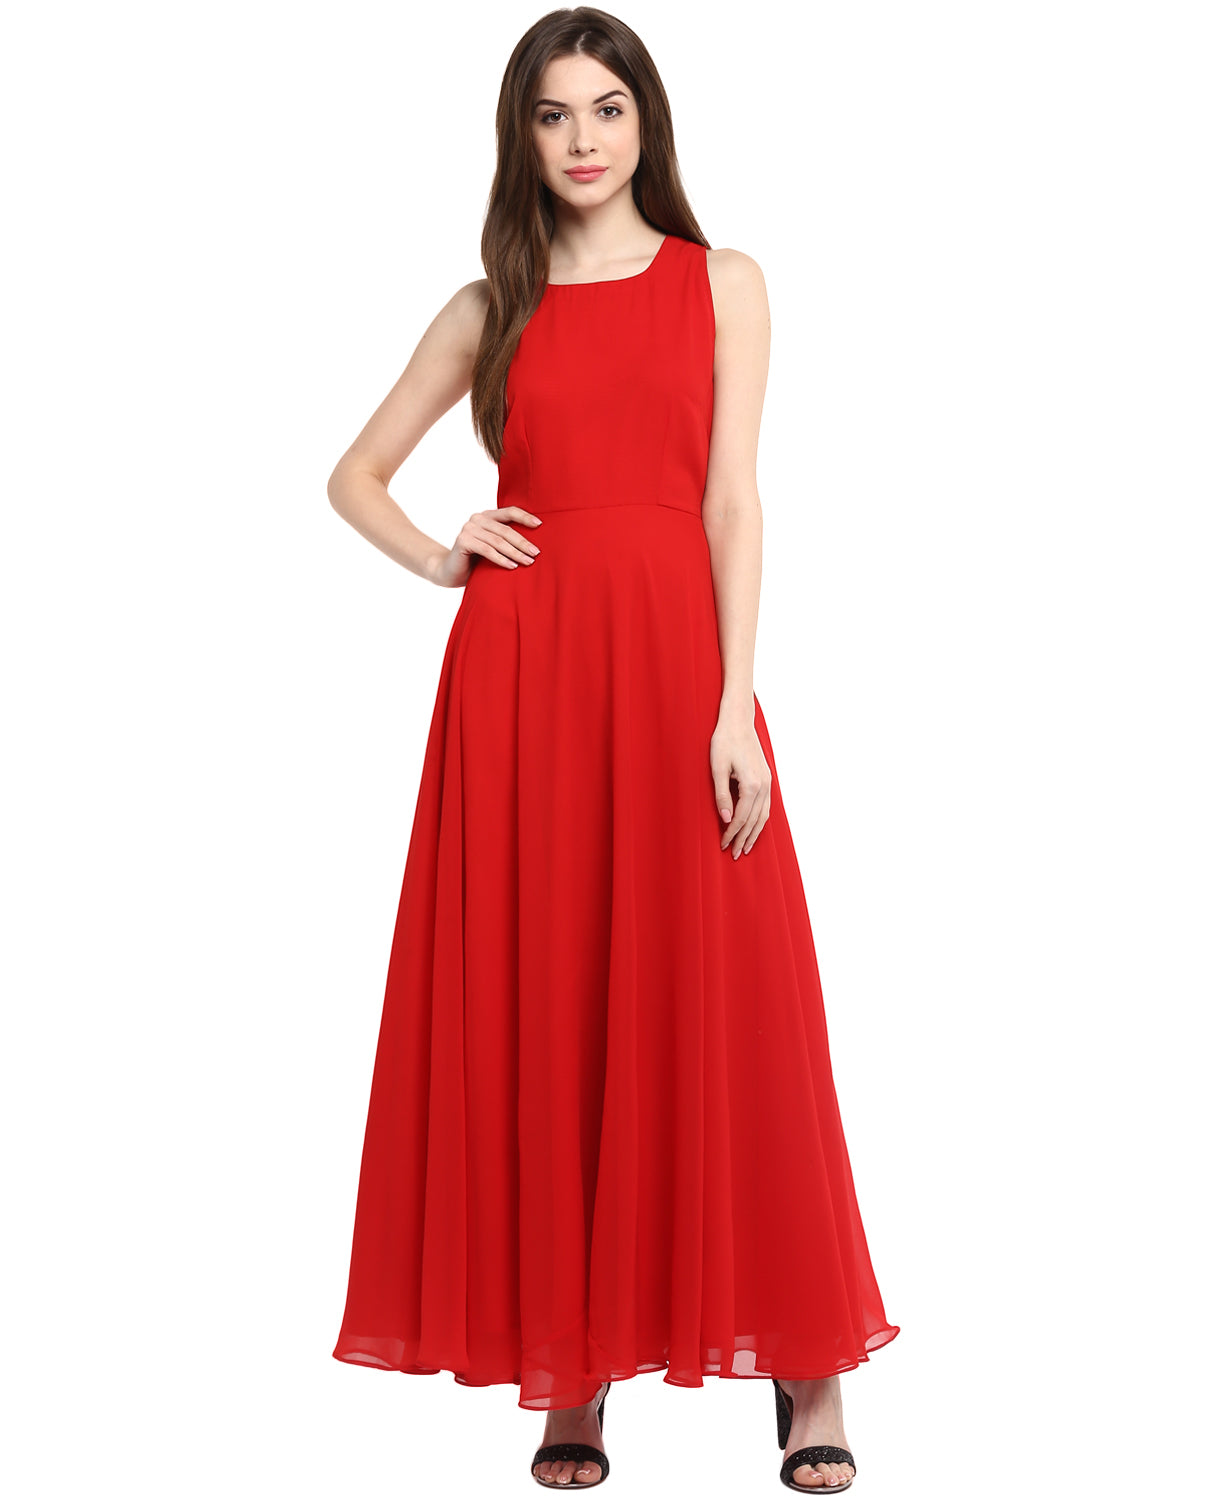 Red Solid Maxi Dress